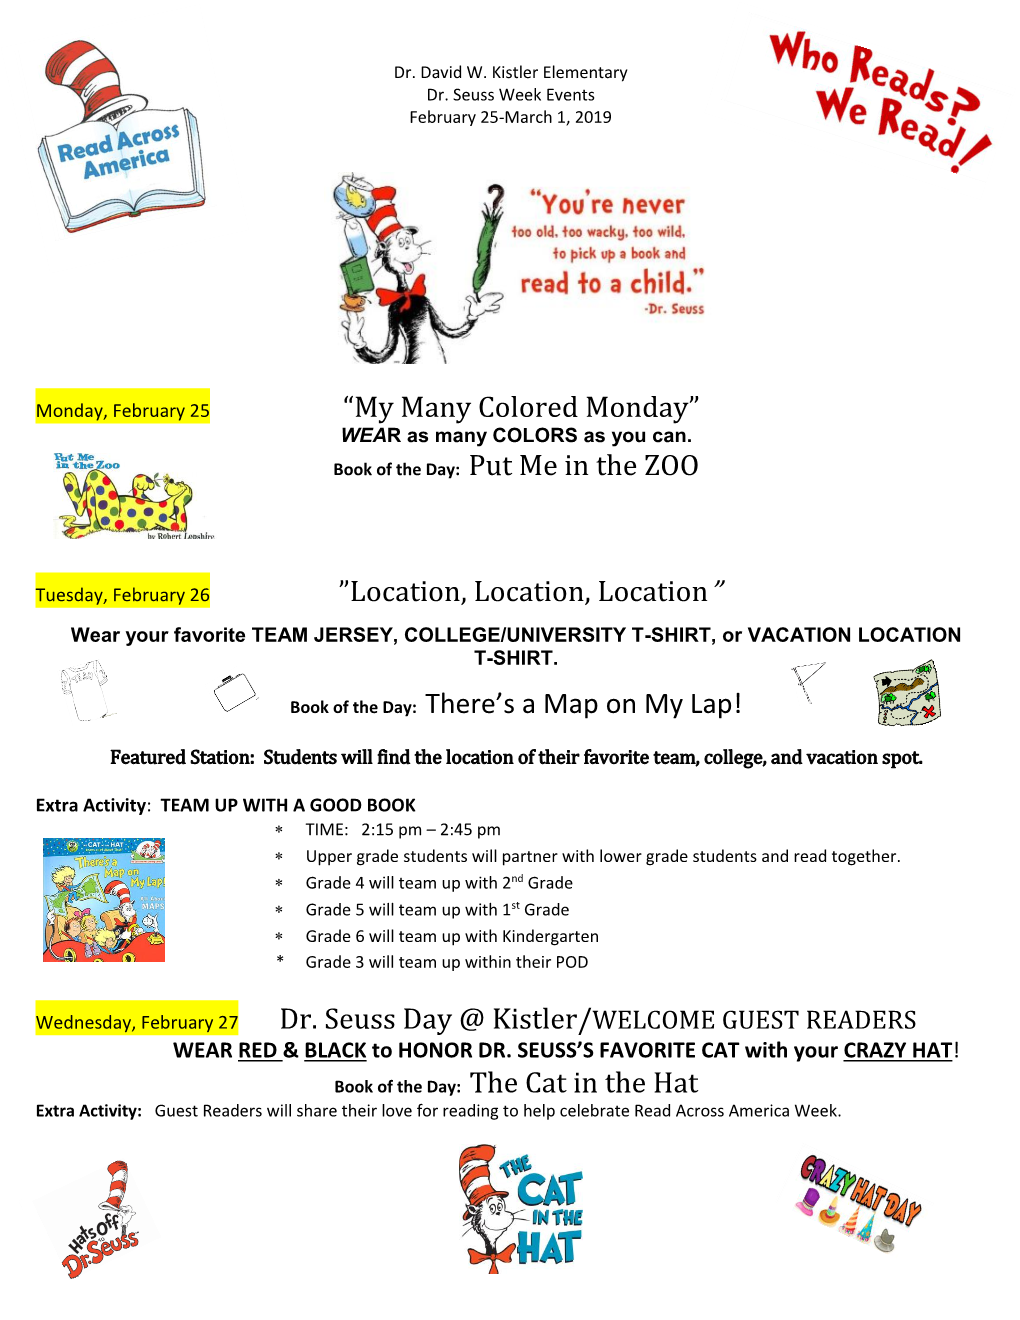 Dr. Seuss Week Events February 25-March 1, 2019